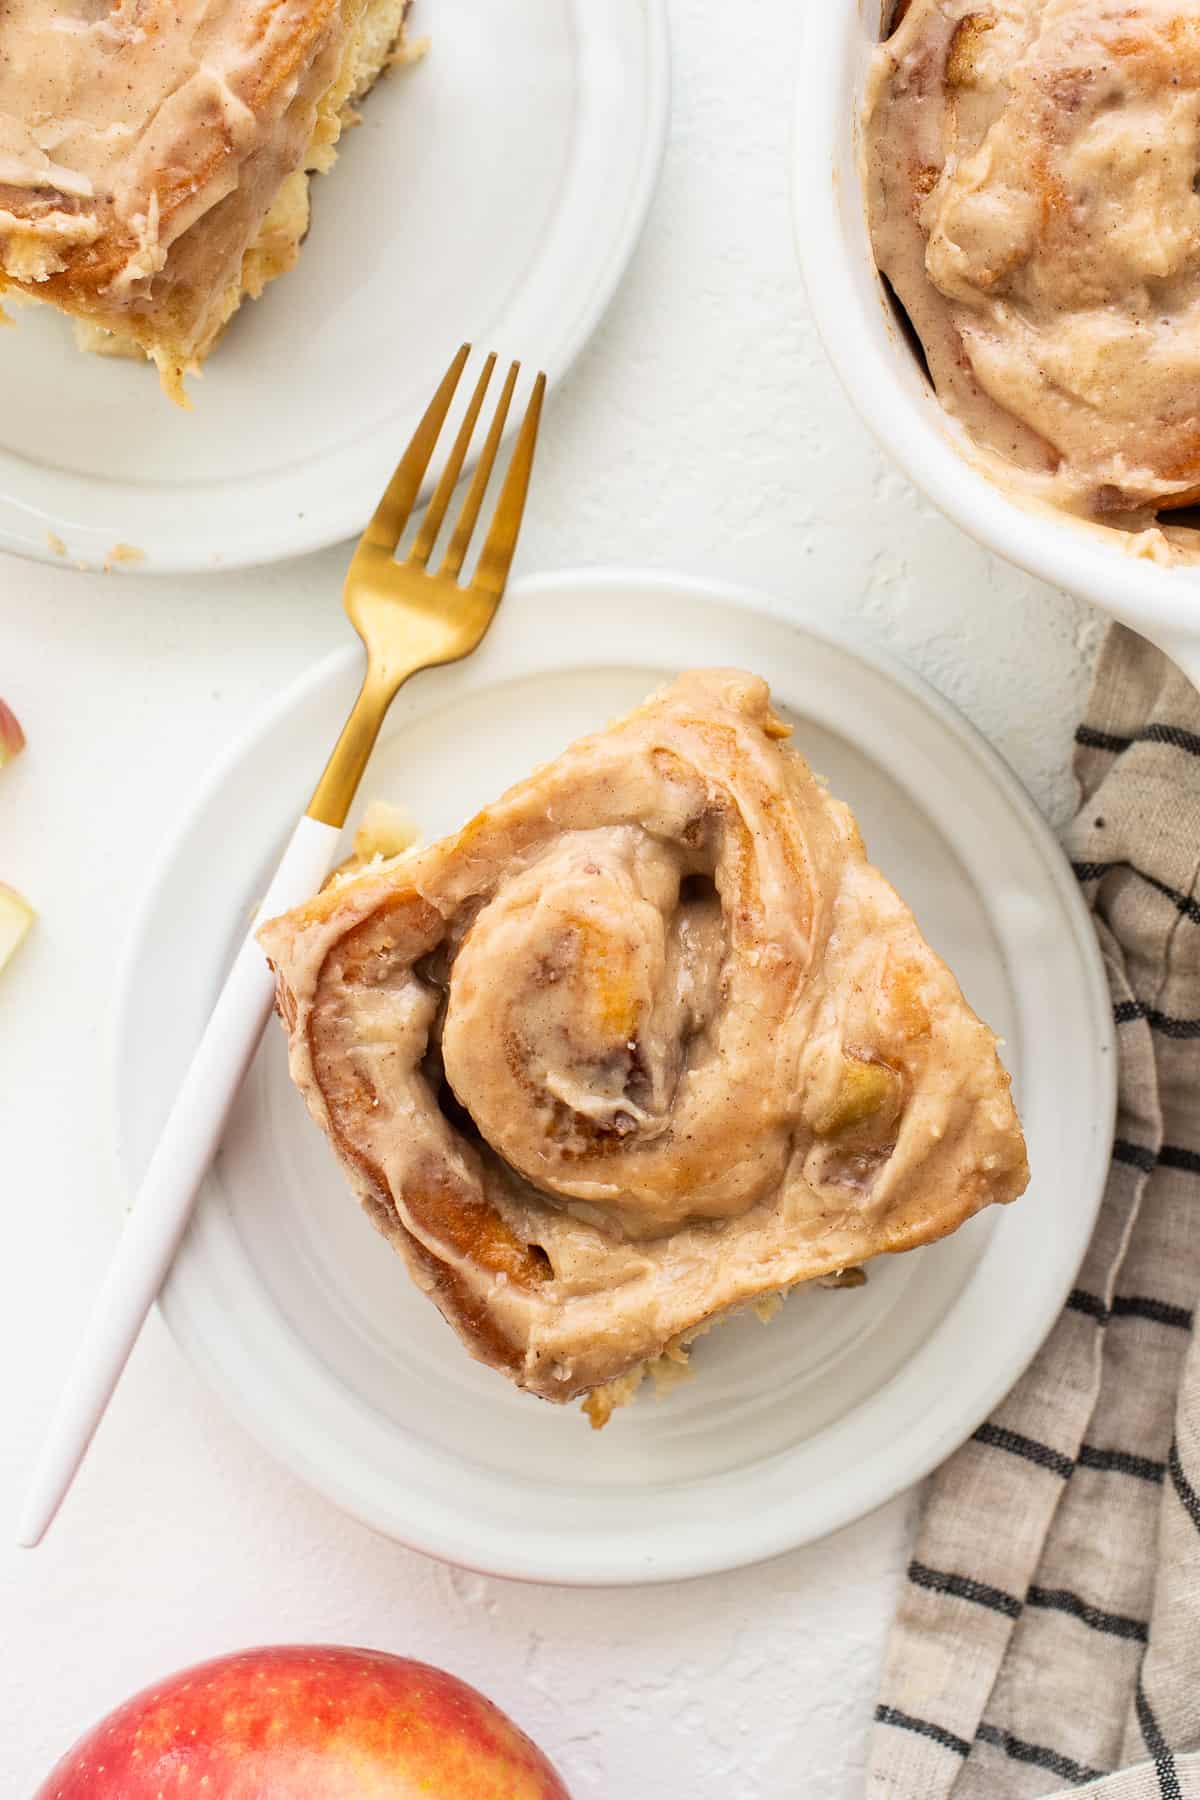 One apple cinnamon roll on a plate with a fork.